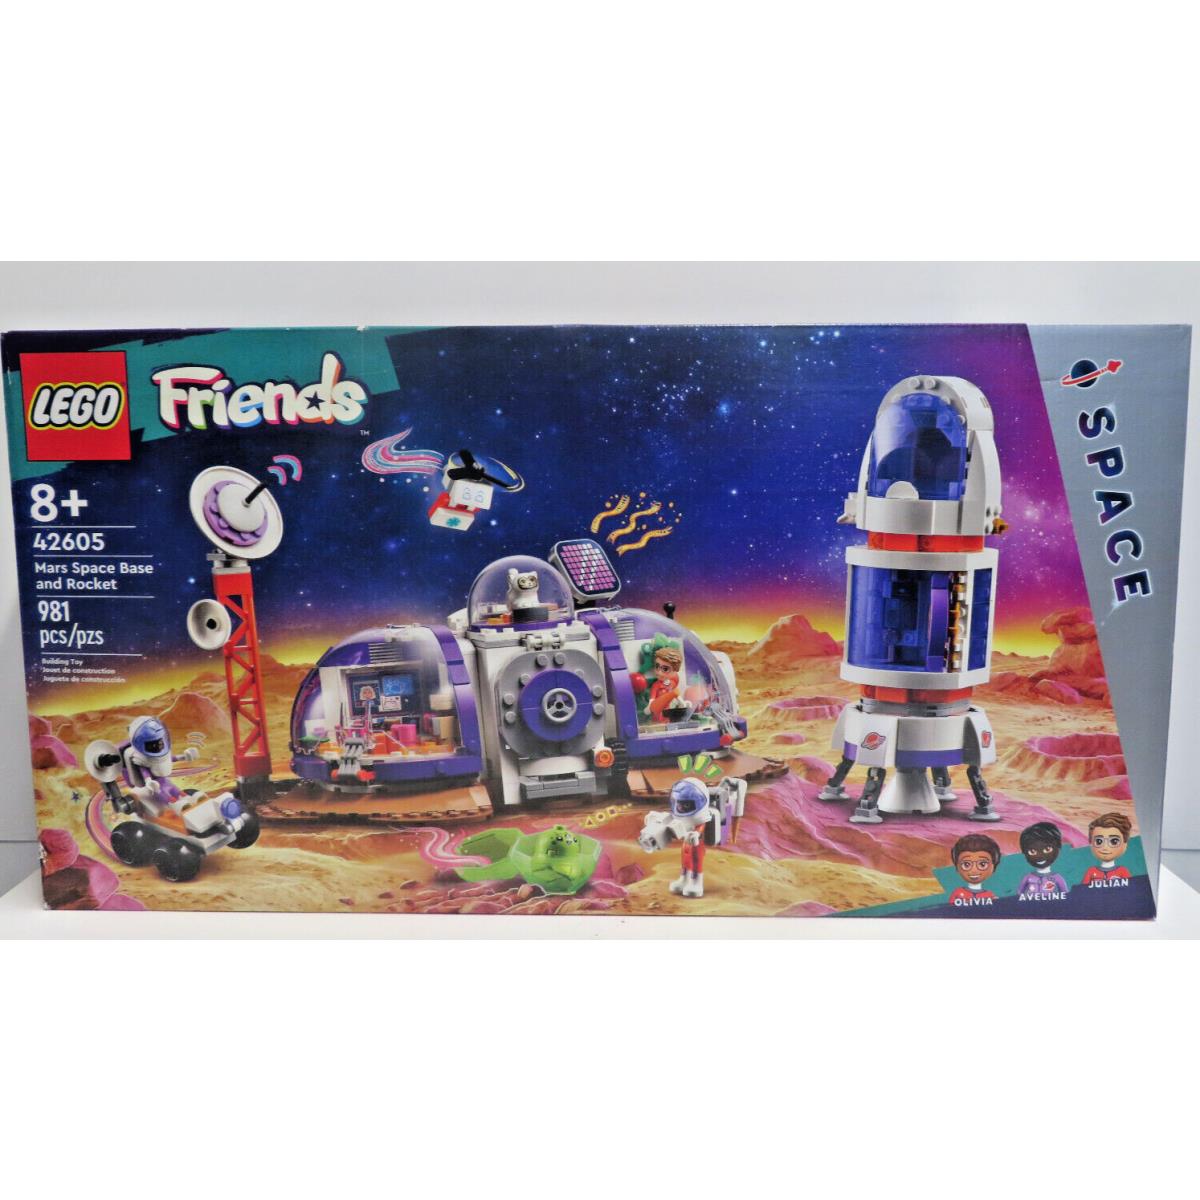 Lego Friends Mars Space Base and Rocket 42605